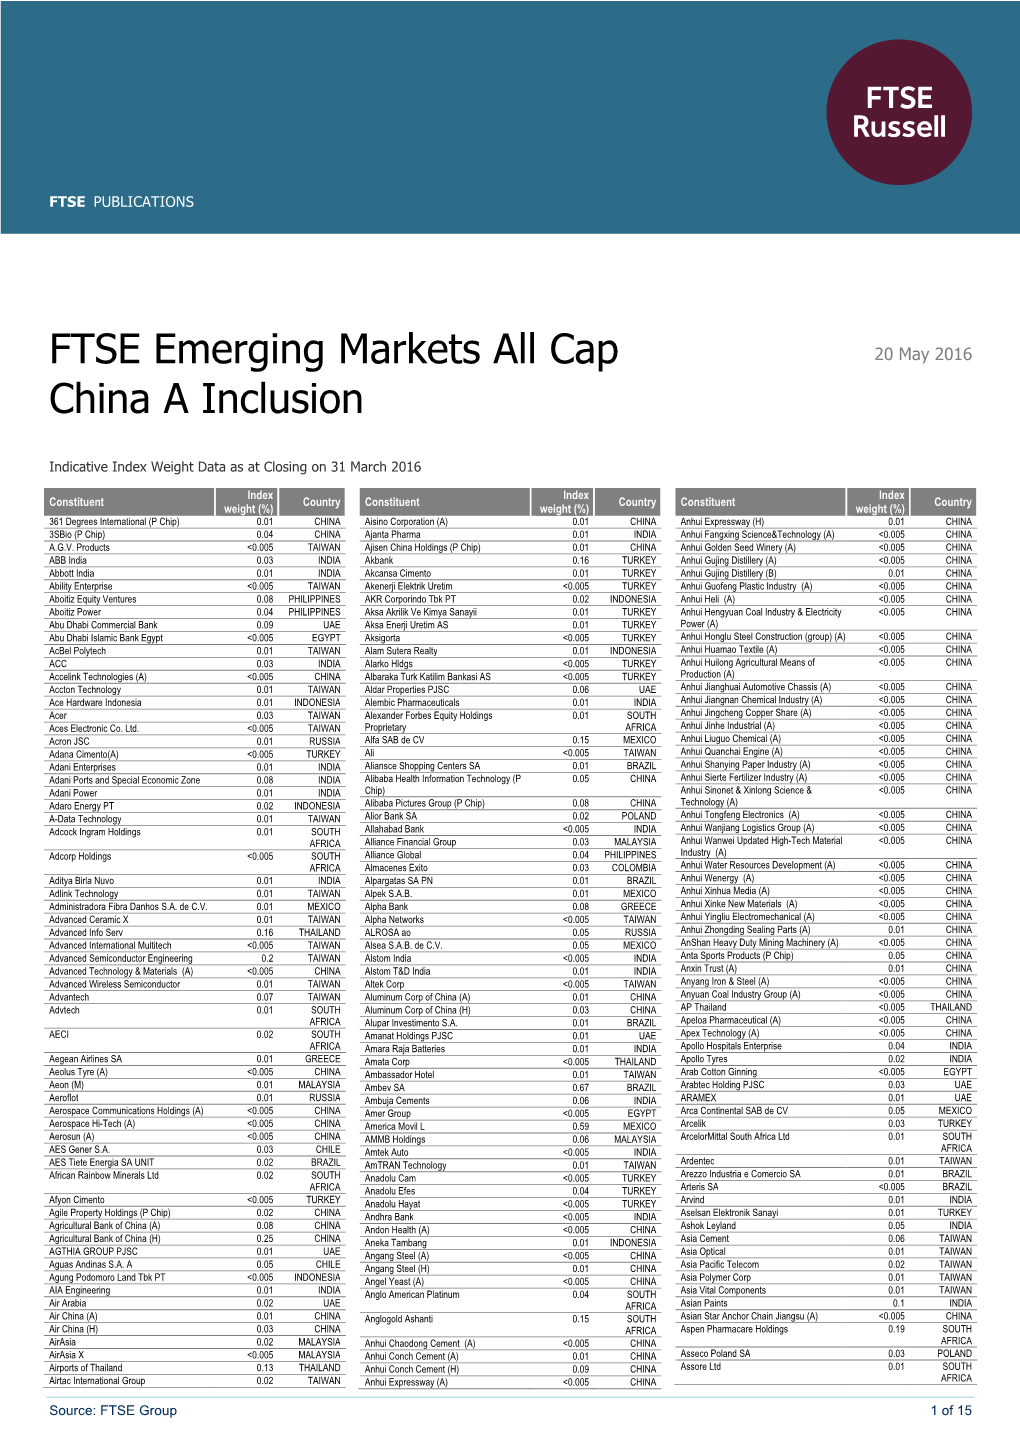 FTSE Emerging Markets All Cap China a Inclusion